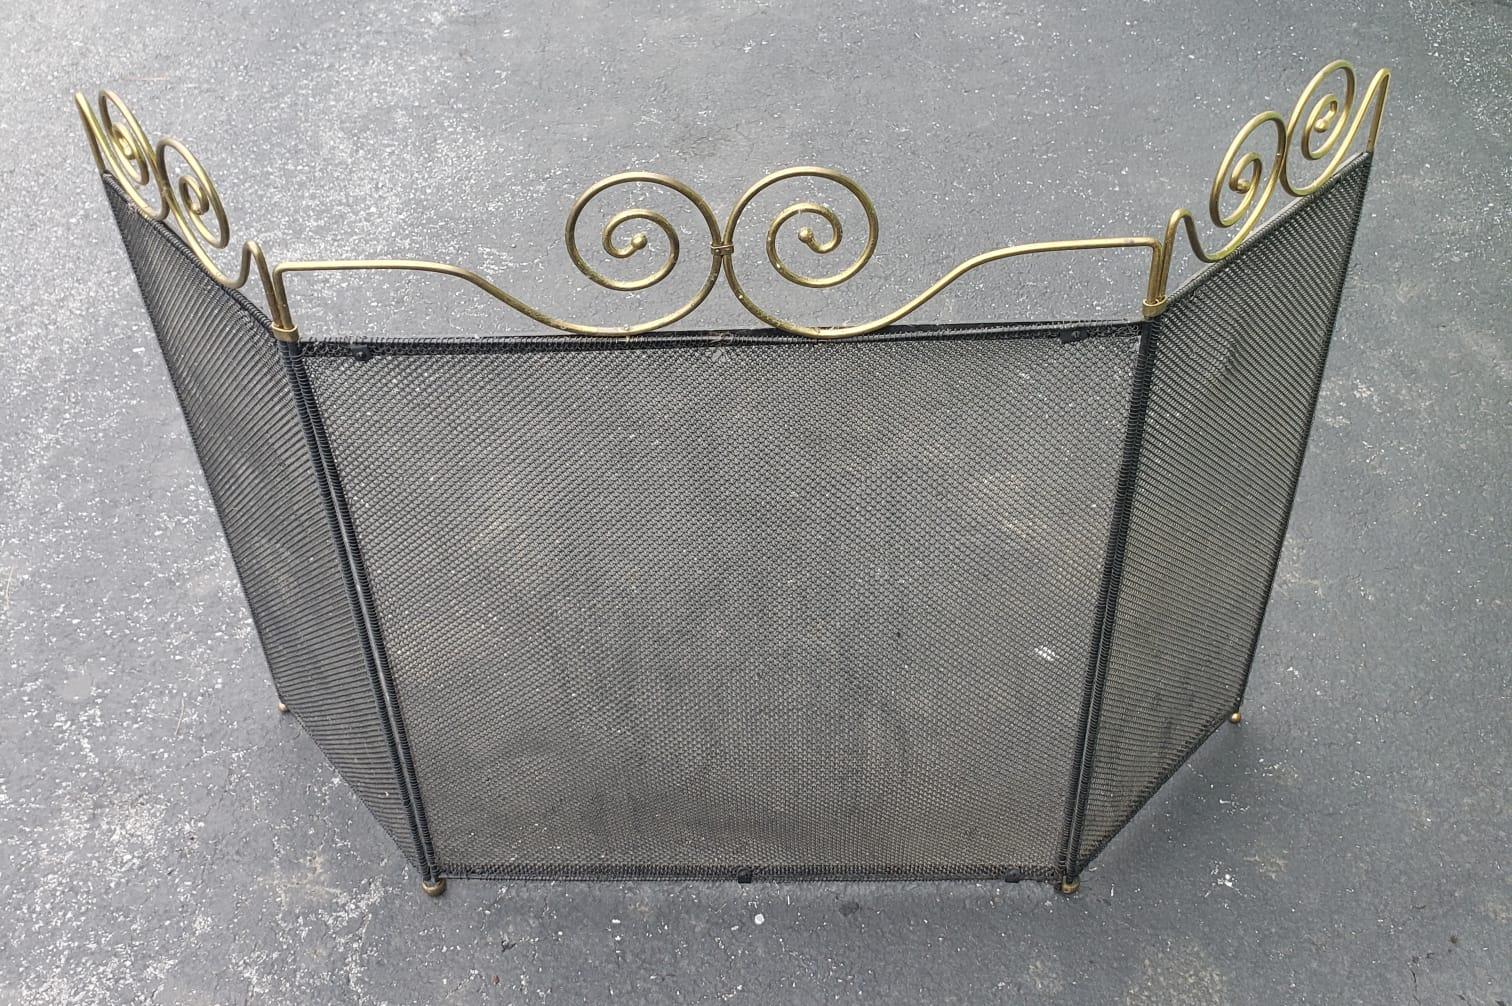 Metalwork 1960s Vintage Wire Mesh and Brass Ornate Fireplace Screen For Sale